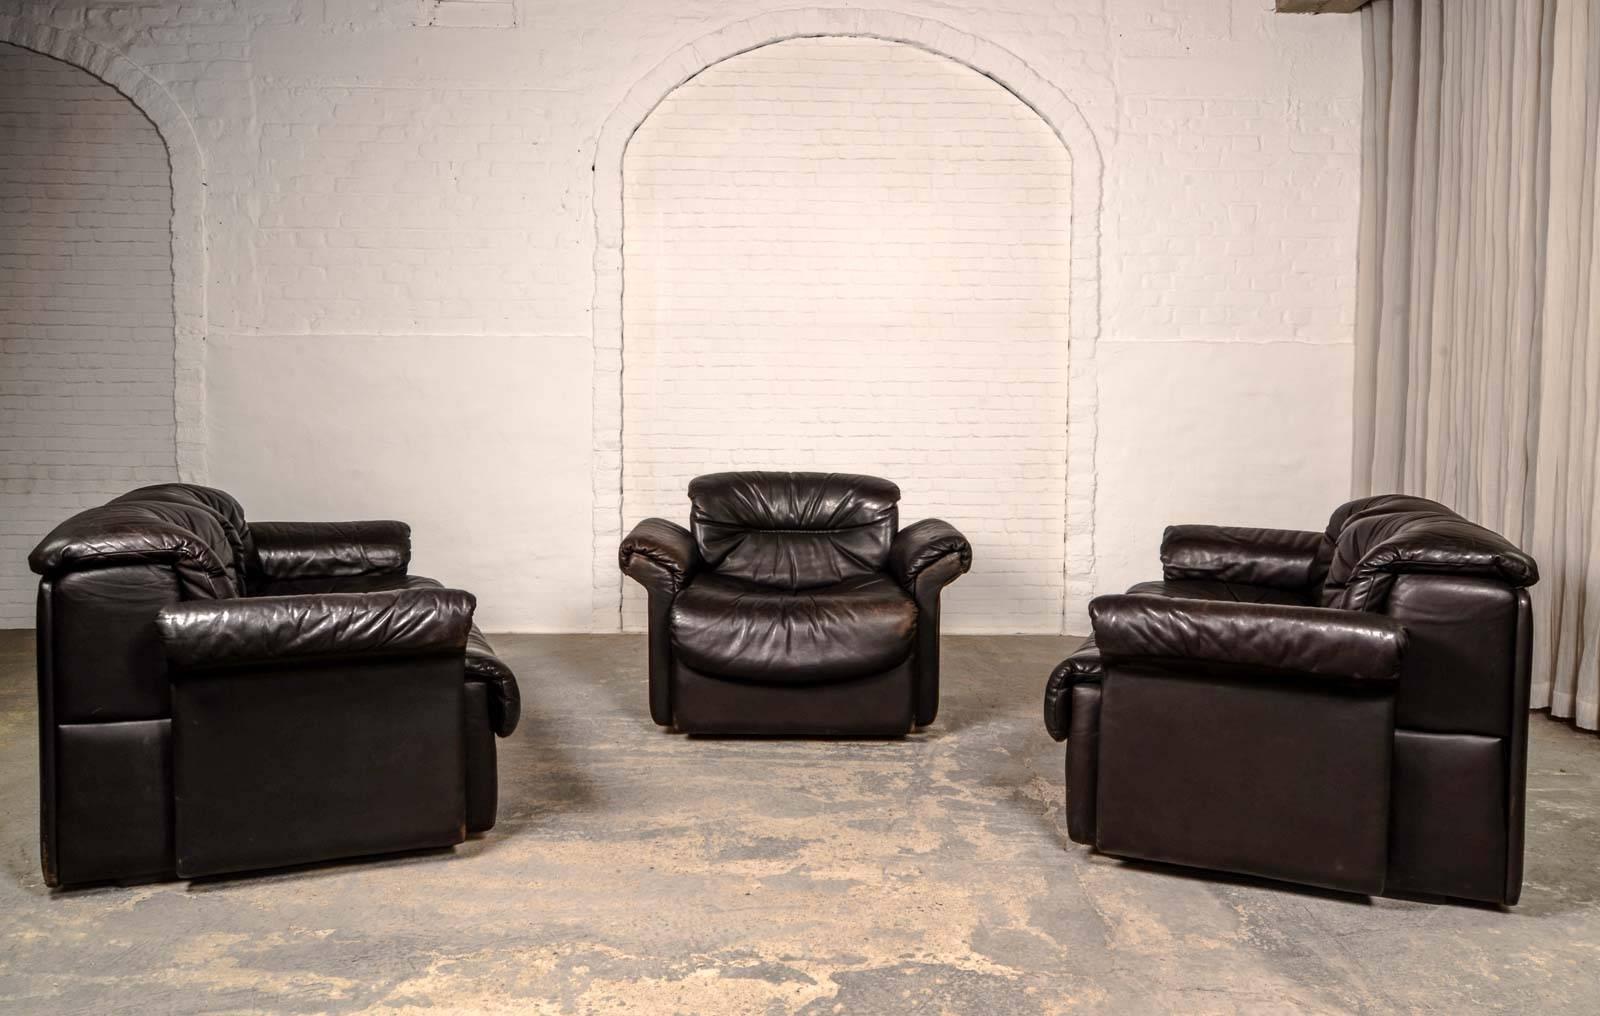 Exclusive set of two rare modernistic leather sofas and lounge chair beautifully designed in the eighties for De Sede. Executed in a deep fine blackish brown leather upholstery with subtle leather lace details. This Swiss design seating group is in